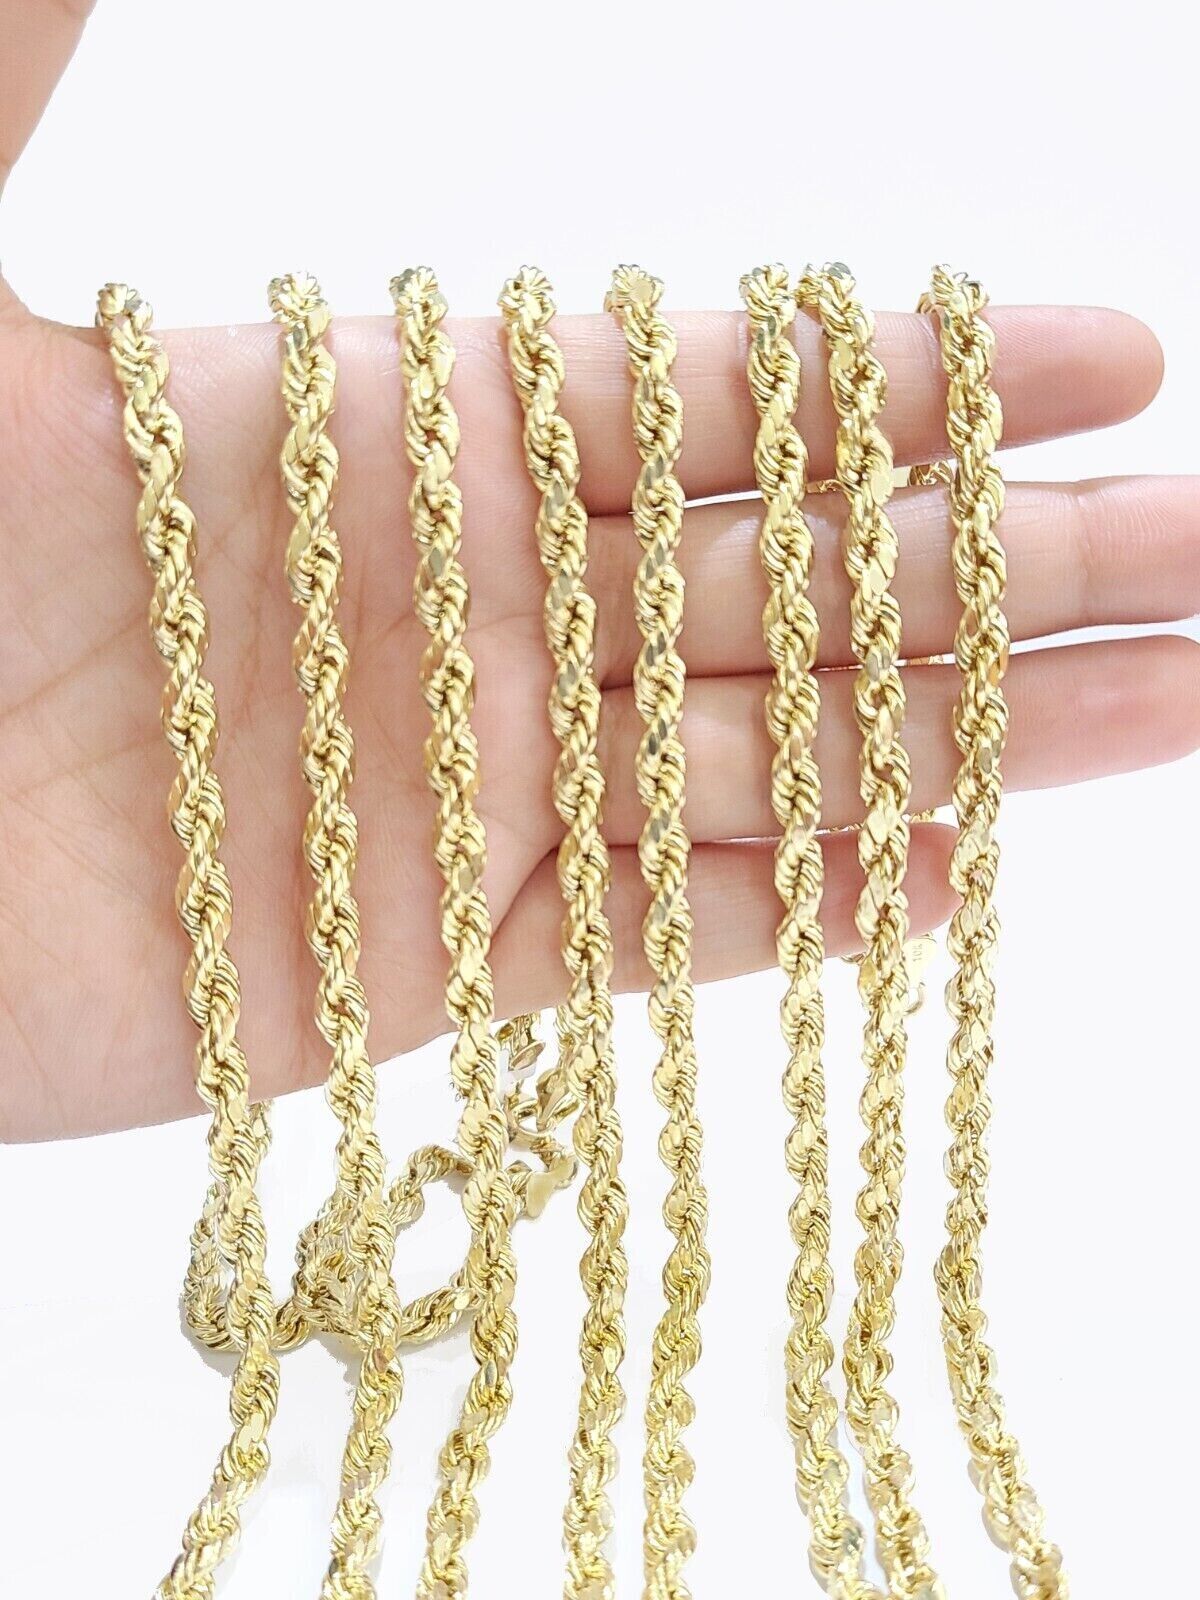 Real 10K Yellow Gold Rope Chain 6mm Necklace 20-30'' Inches Lobster Lock  10kt